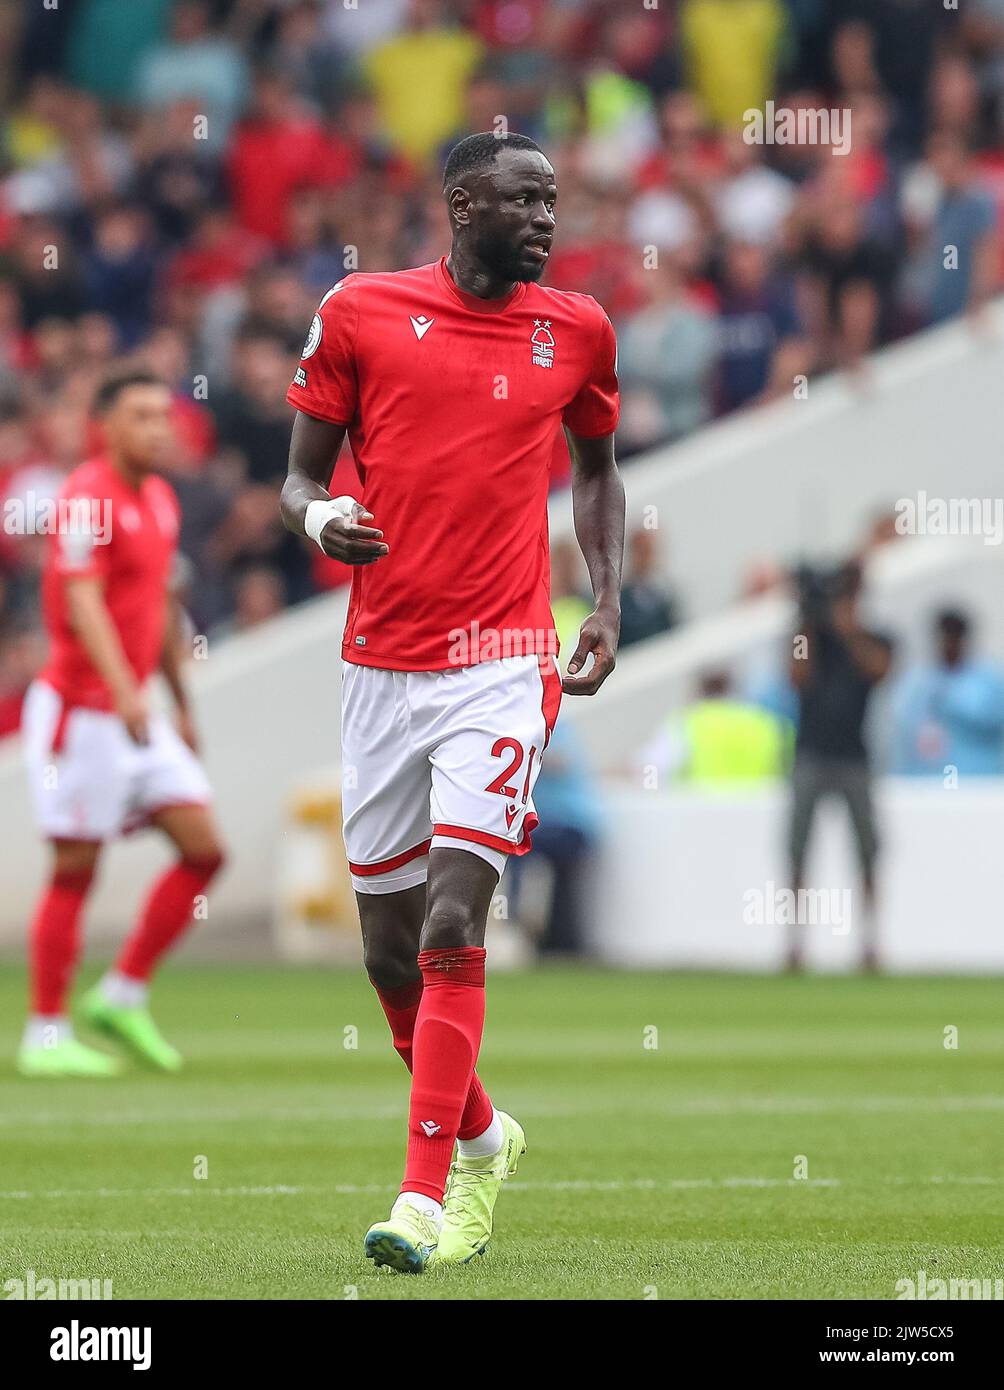 Cheikhou Kouyate #21 of Nottingham Forest during the Premier League match Nottingham Forest vs Bournemouth at City Ground, Nottingham, United Kingdom, 3rd September 2022  (Photo by Gareth Evans/News Images) Stock Photo